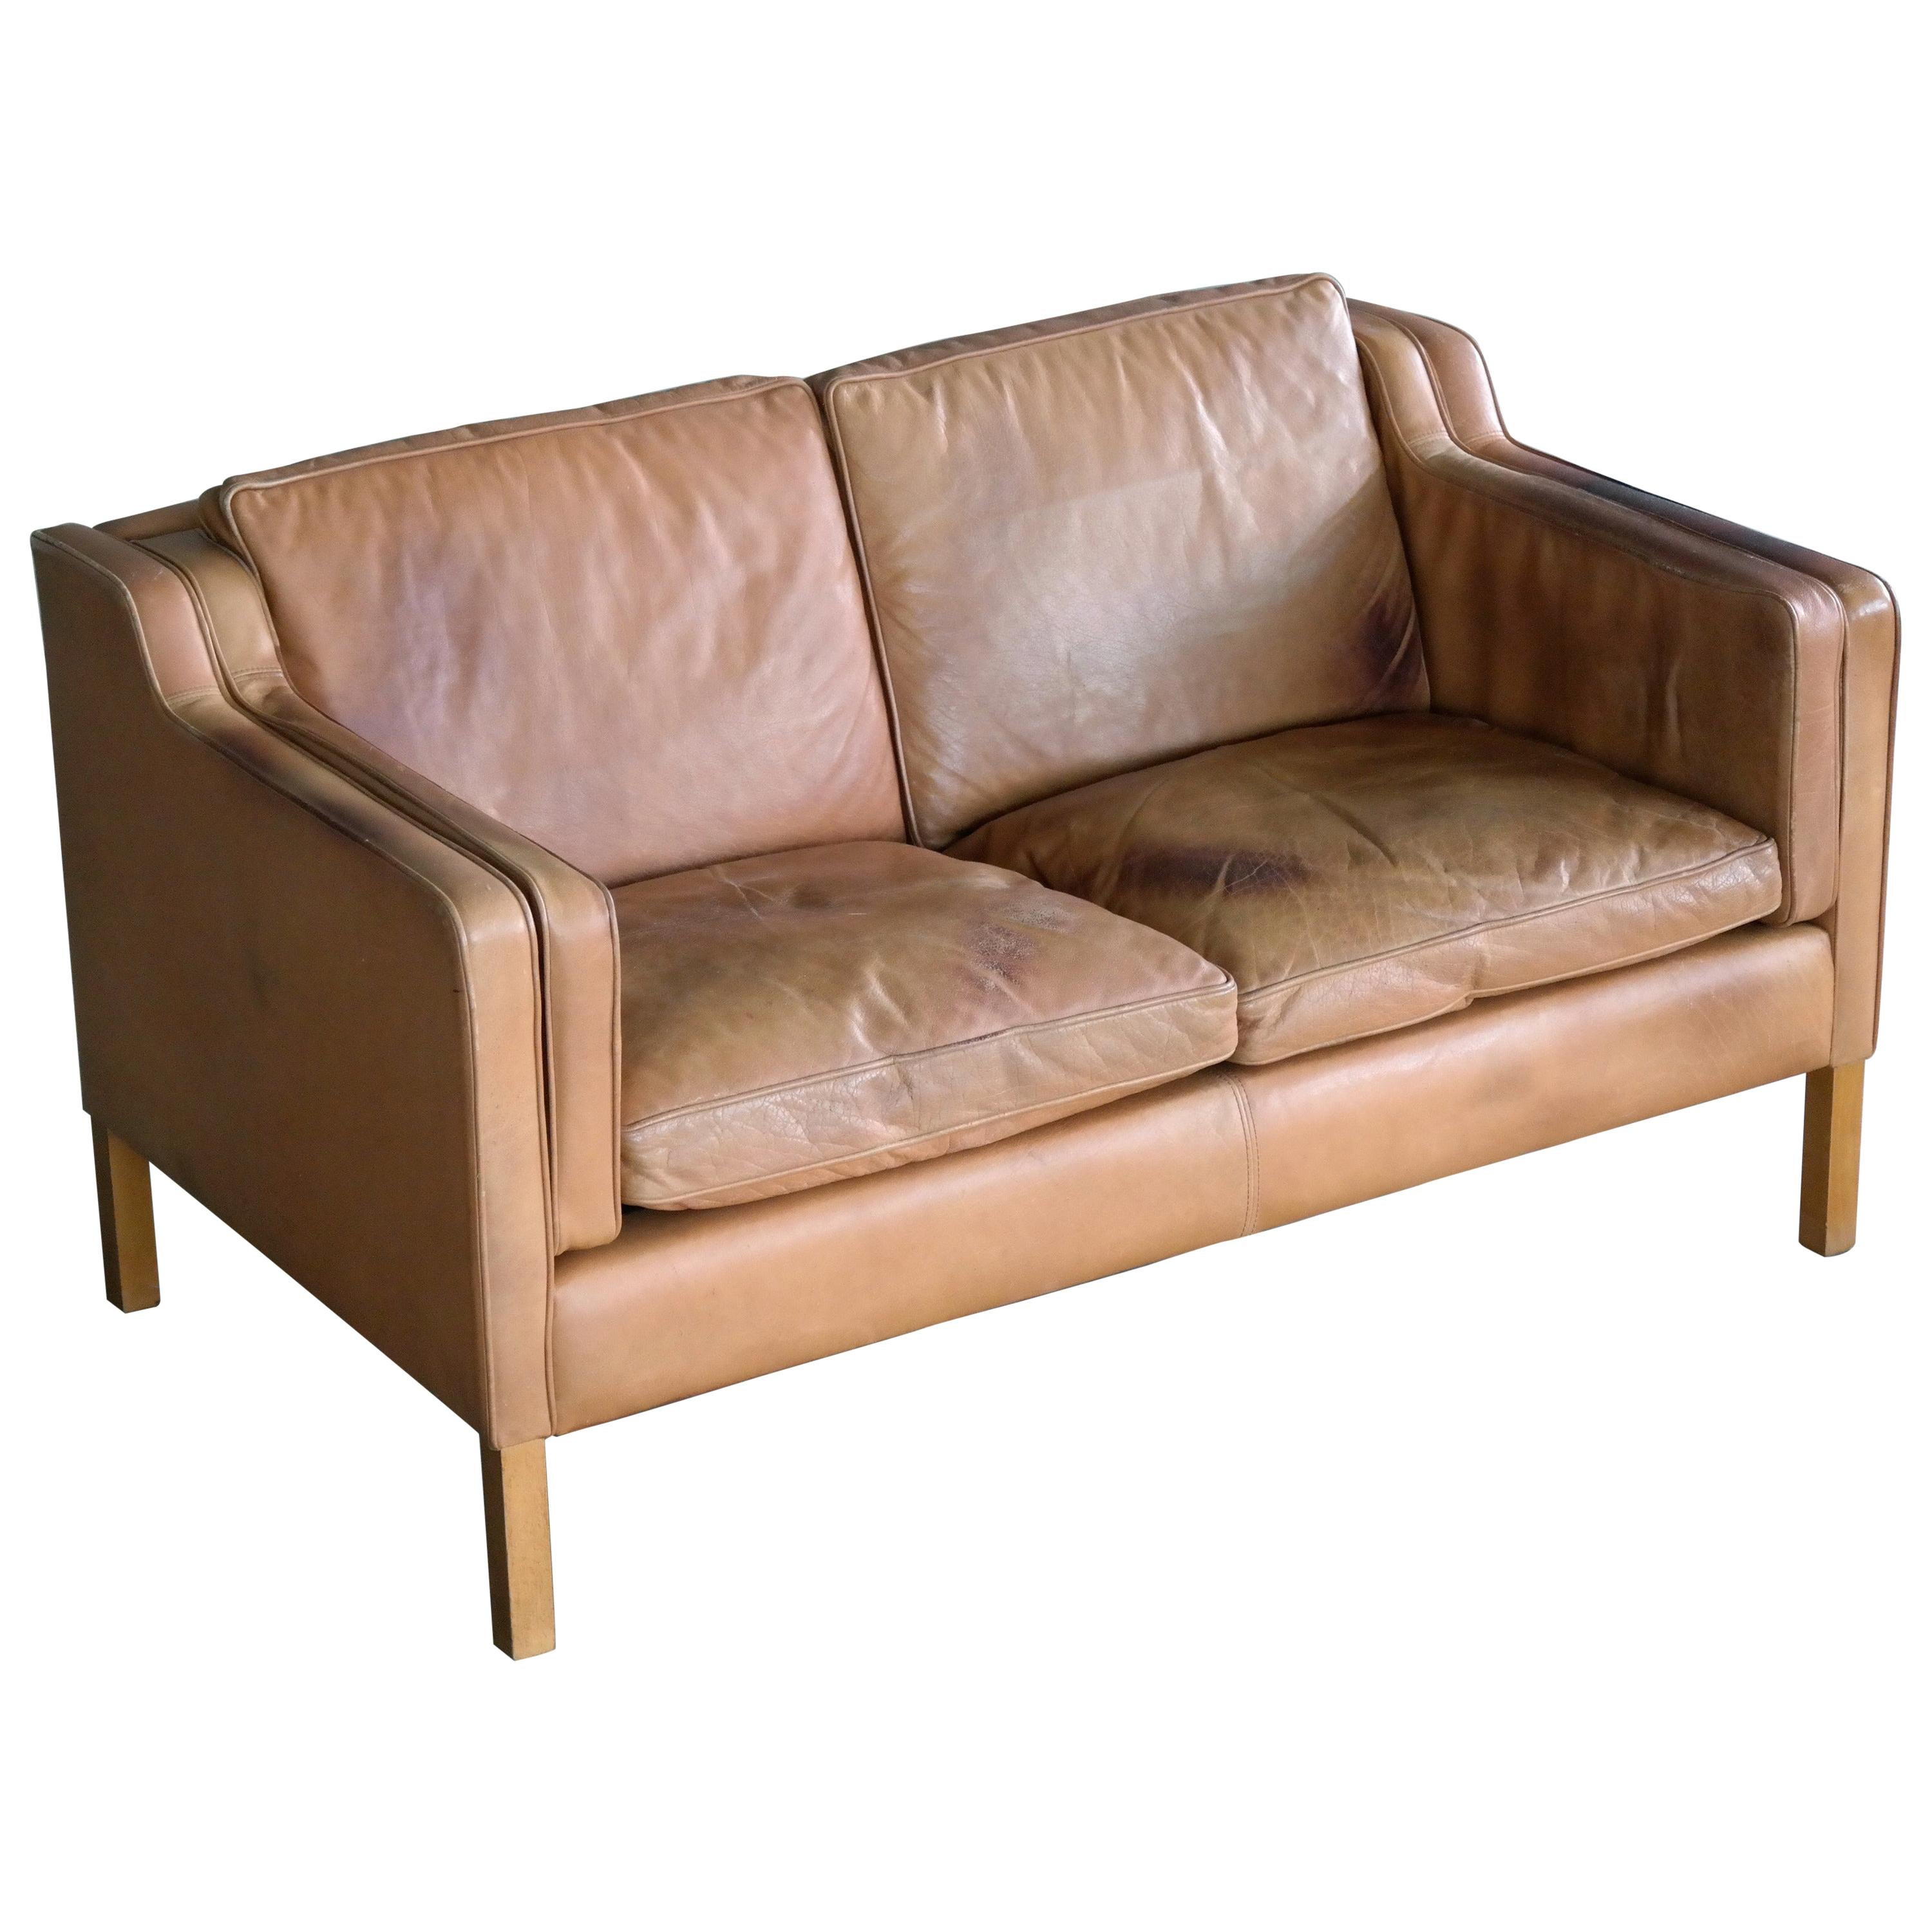 Danish Borge Mogensen Style Two-Seat Tan Leather Sofa with Patina by Stouby